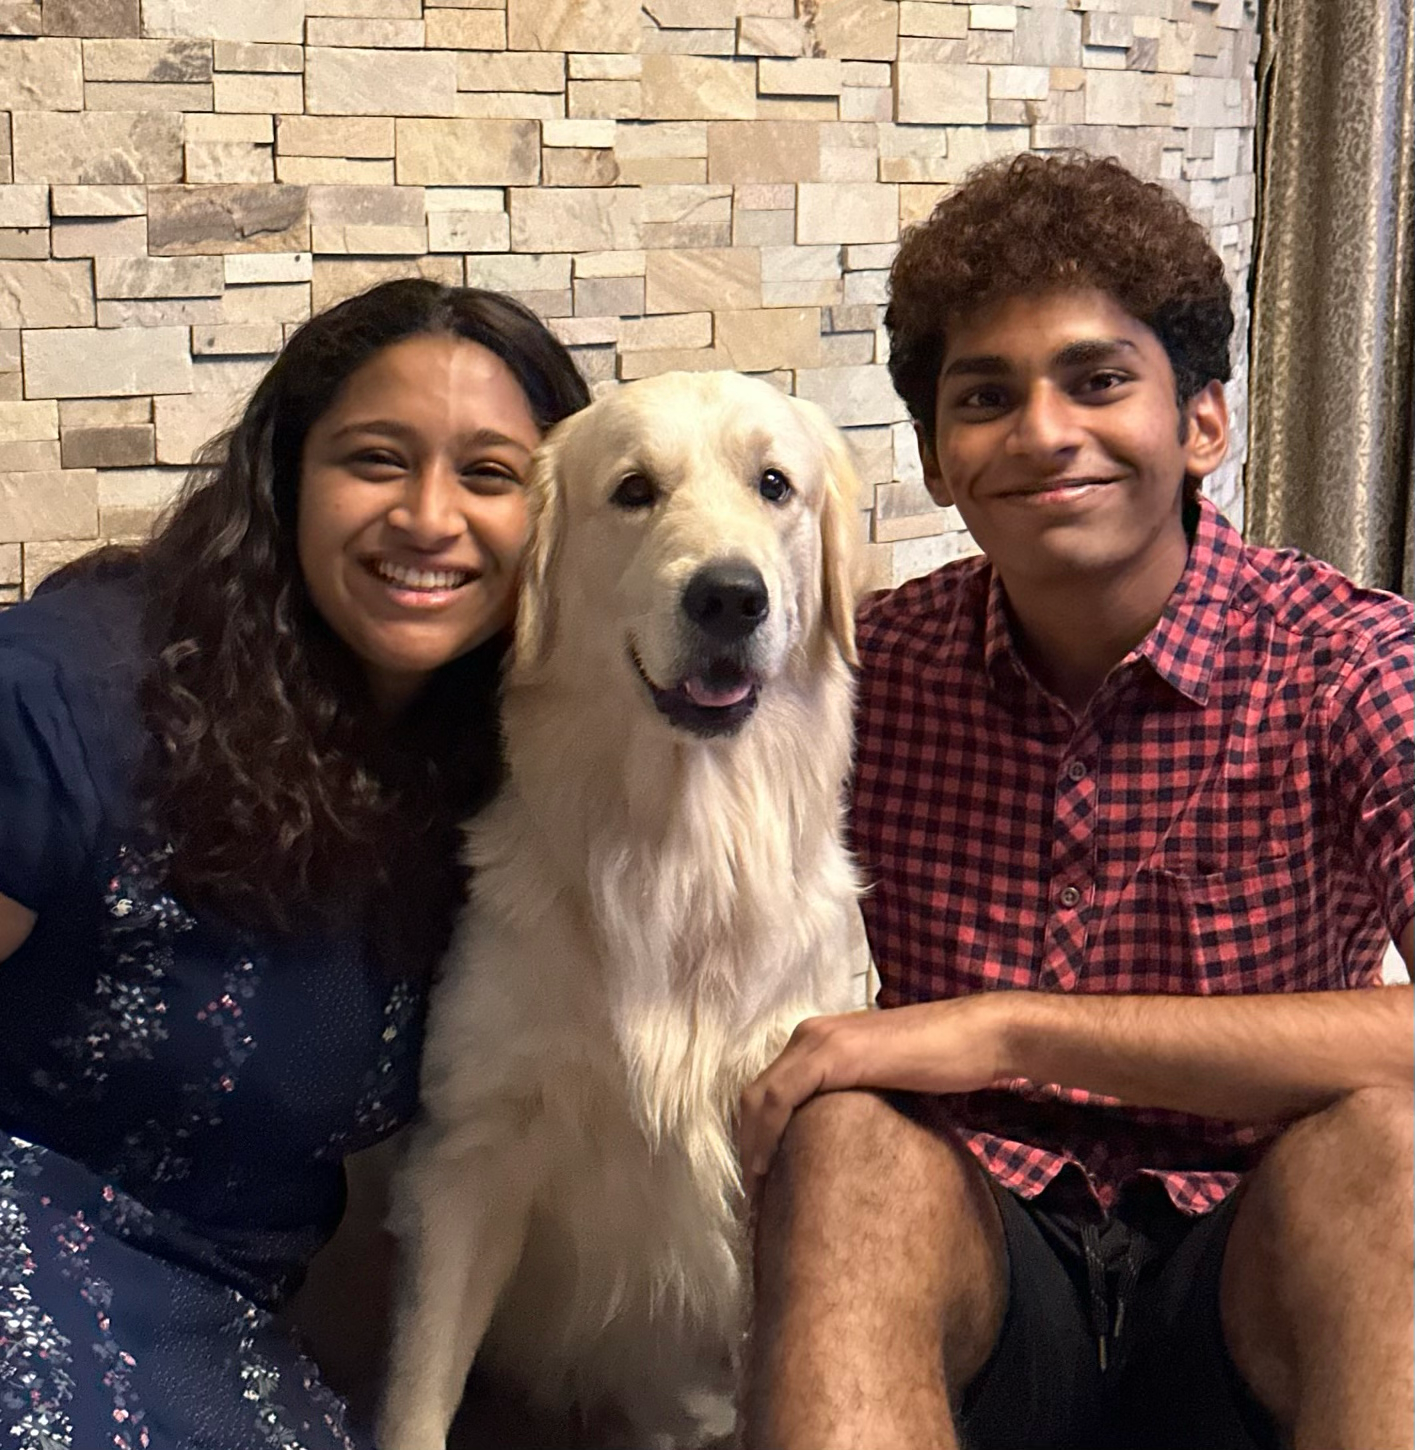 Ashni Arun sitting next to her dog and her brother.